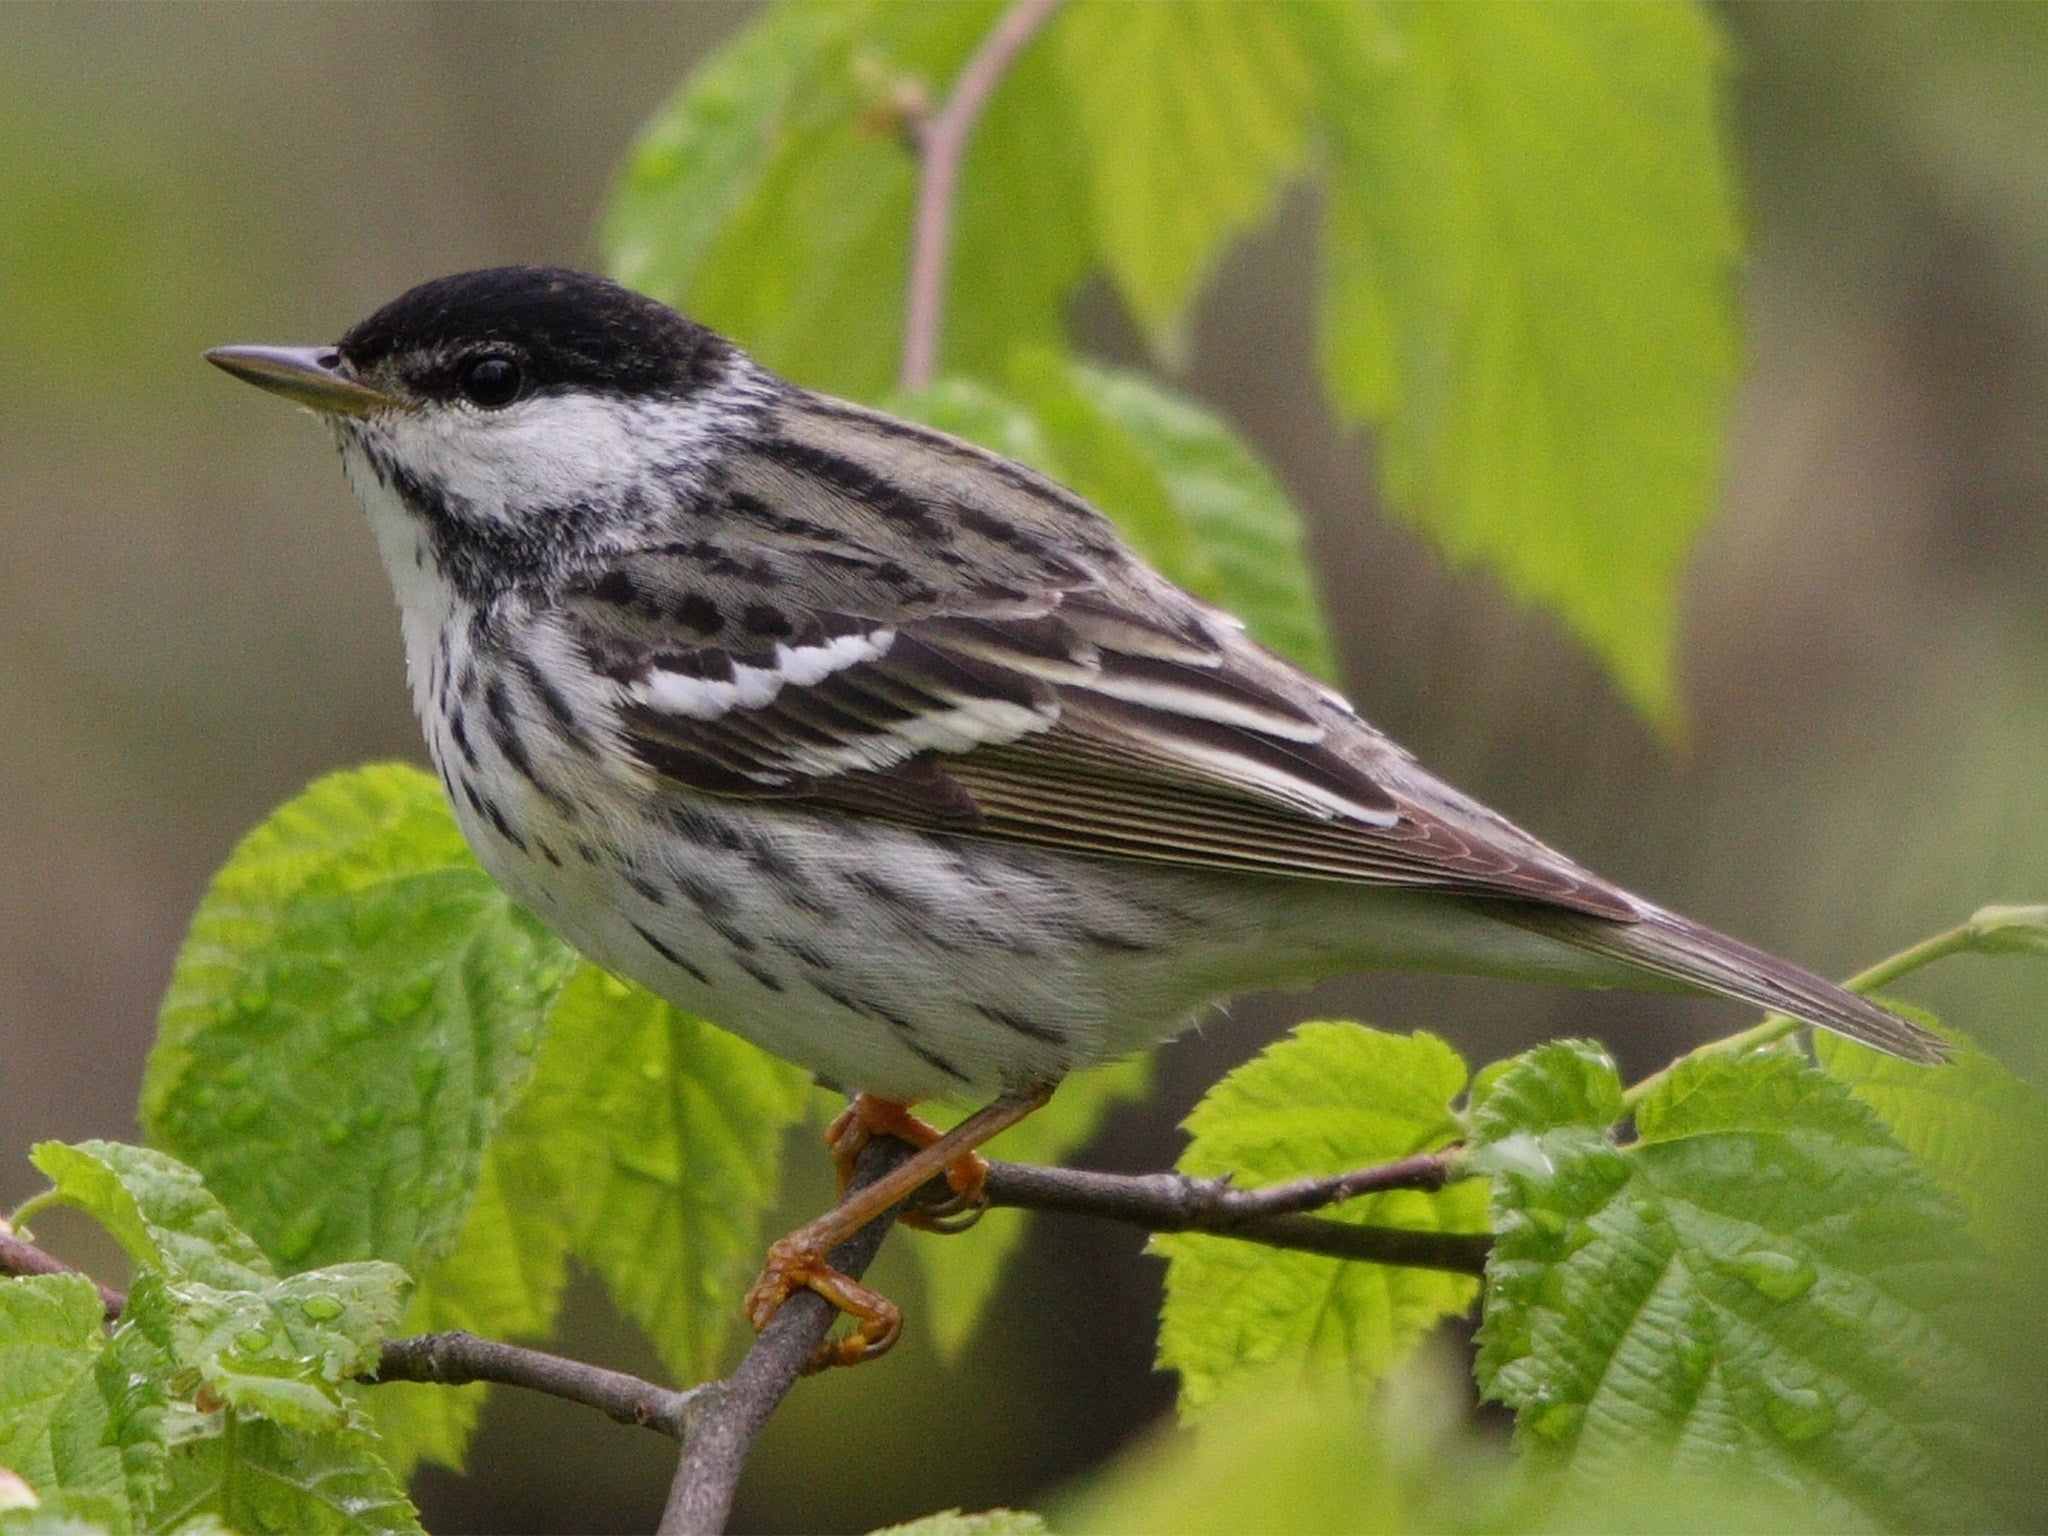 Scientists fitted the recording backpacks to 20 warblers